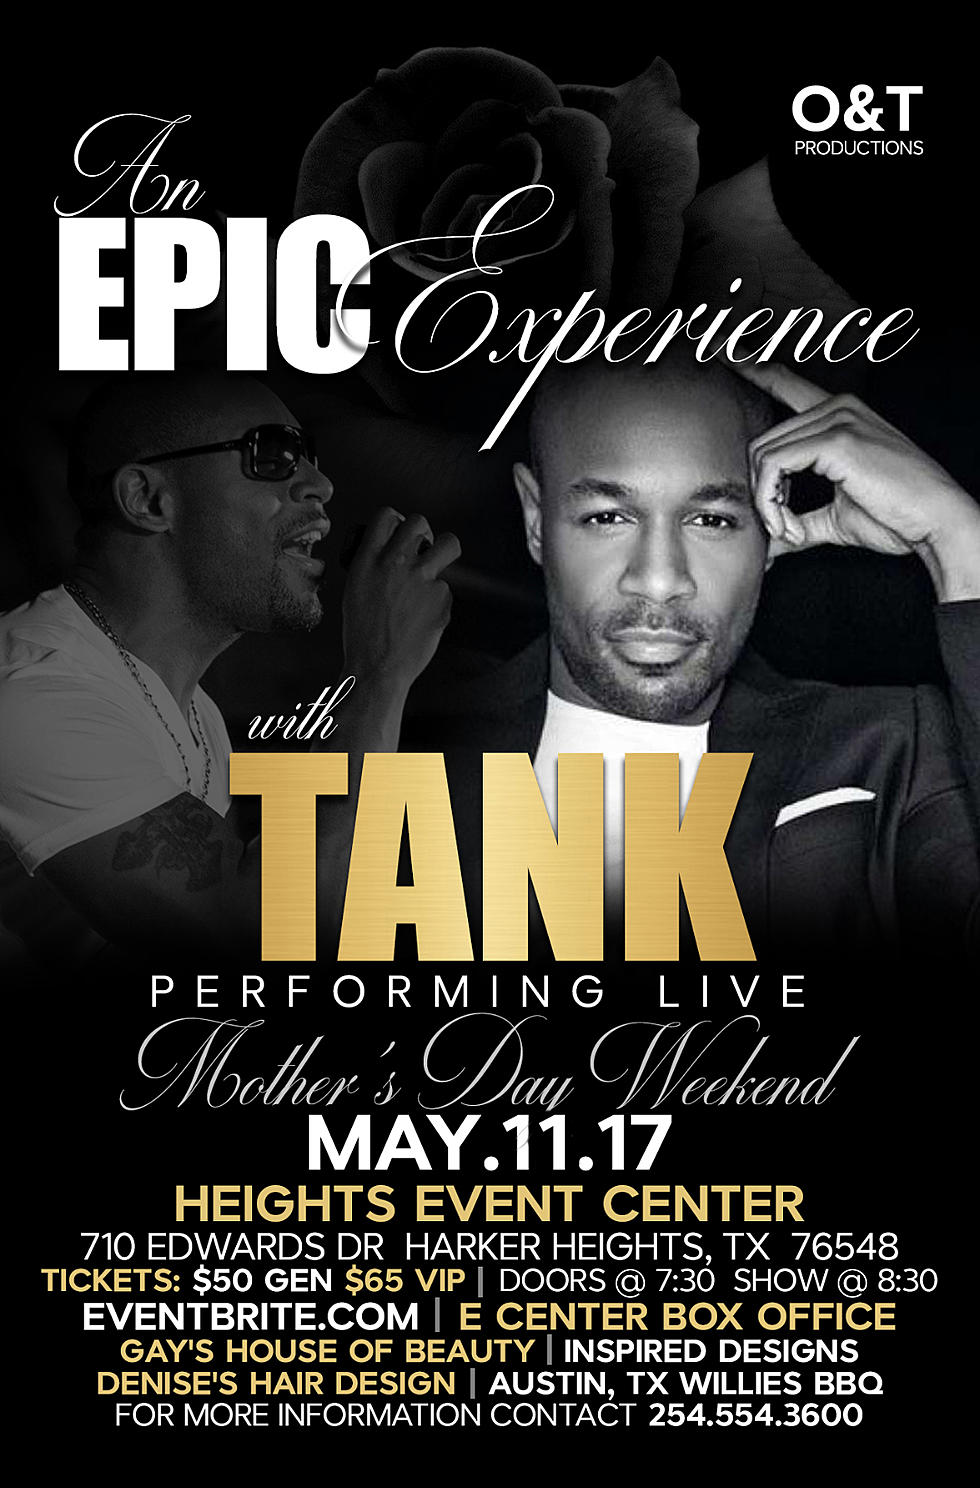 Shani’s got tickets to see Tank at the Harker Heights Entertainment Center!